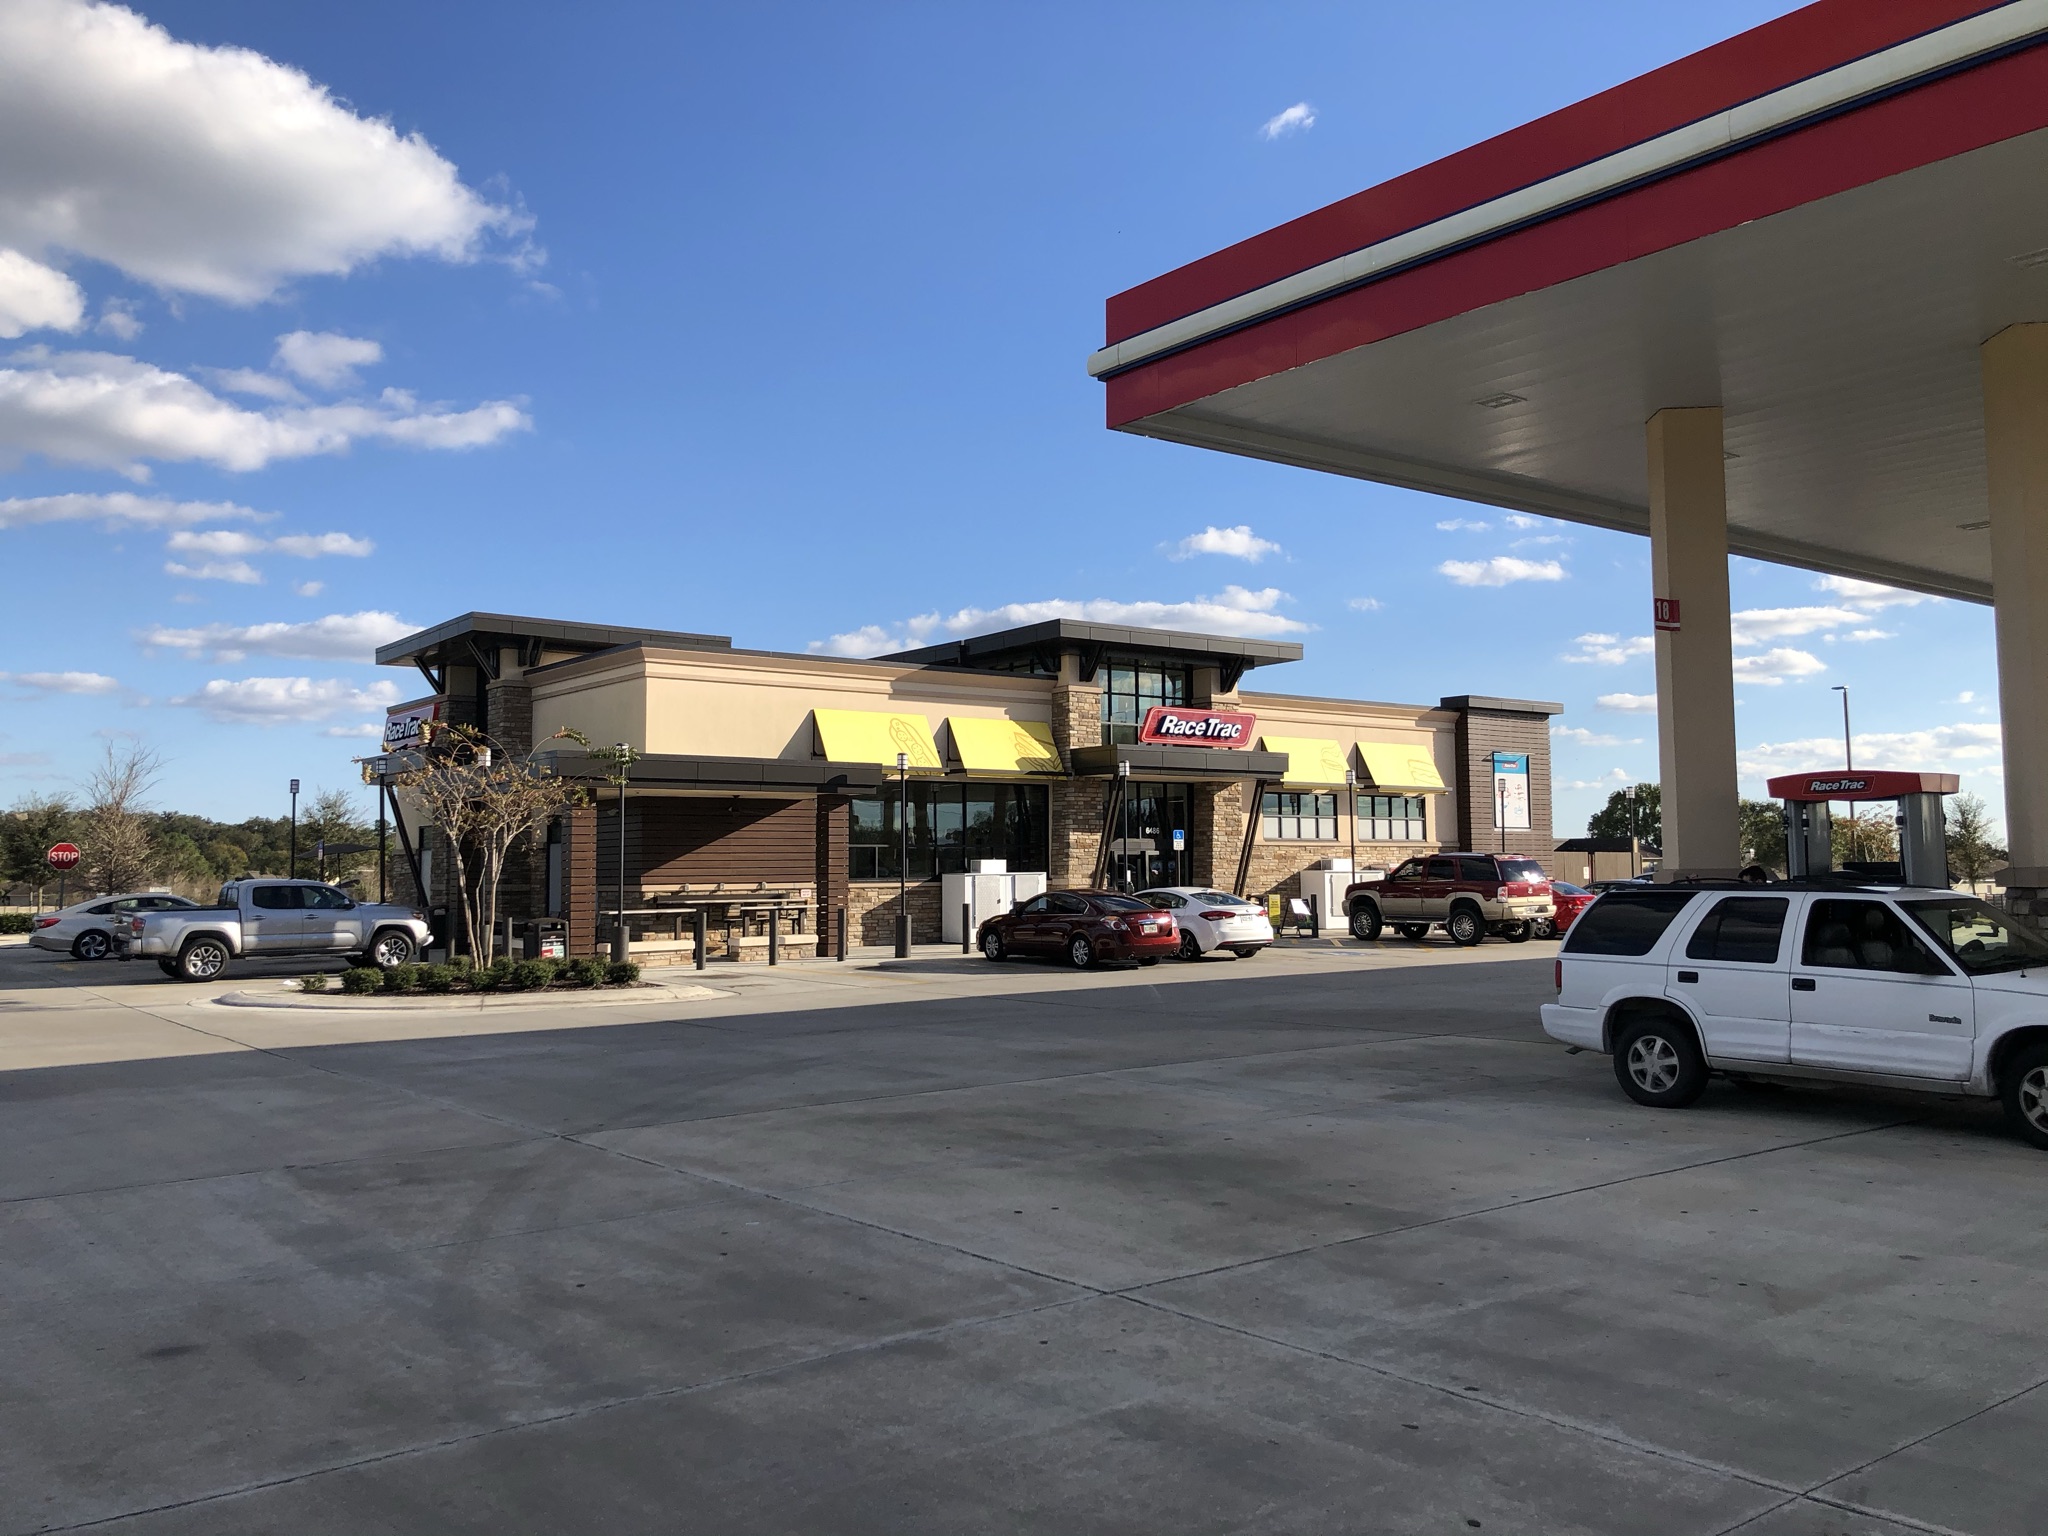 Available property at RaceTrac Exterior